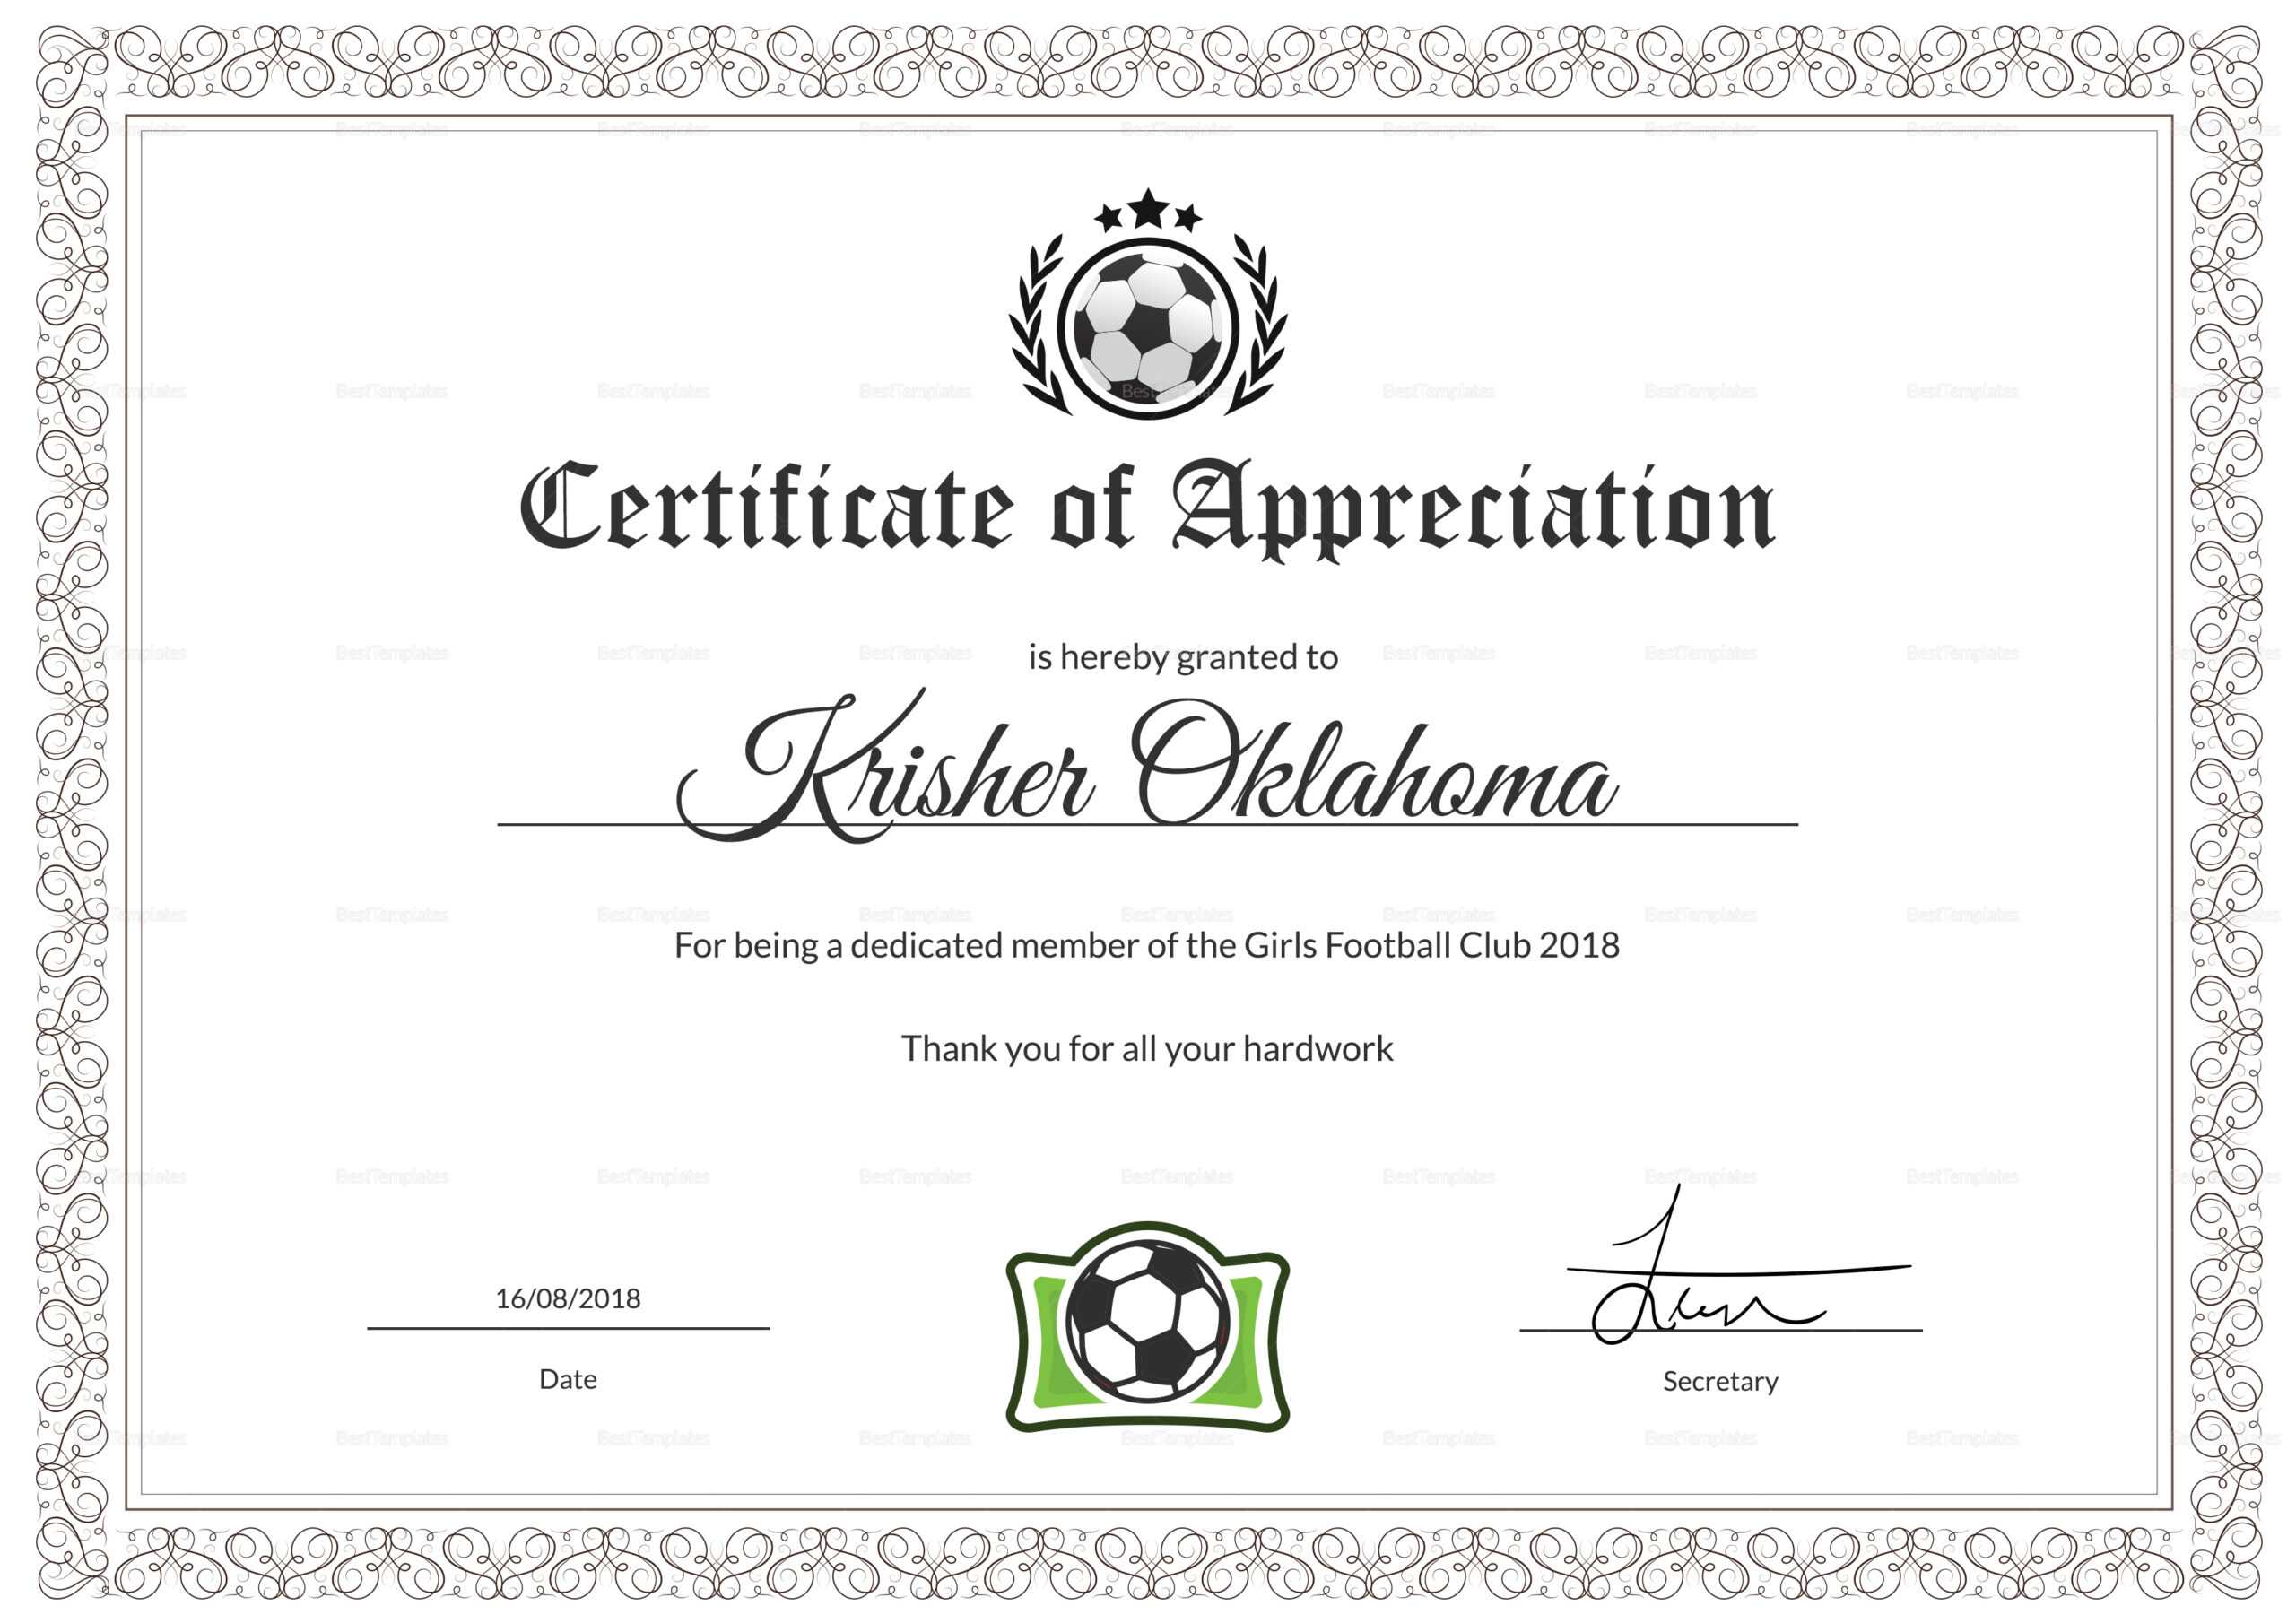 41Ba Certificates Templates For Word And Sports Day With Golf Certificate Templates For Word